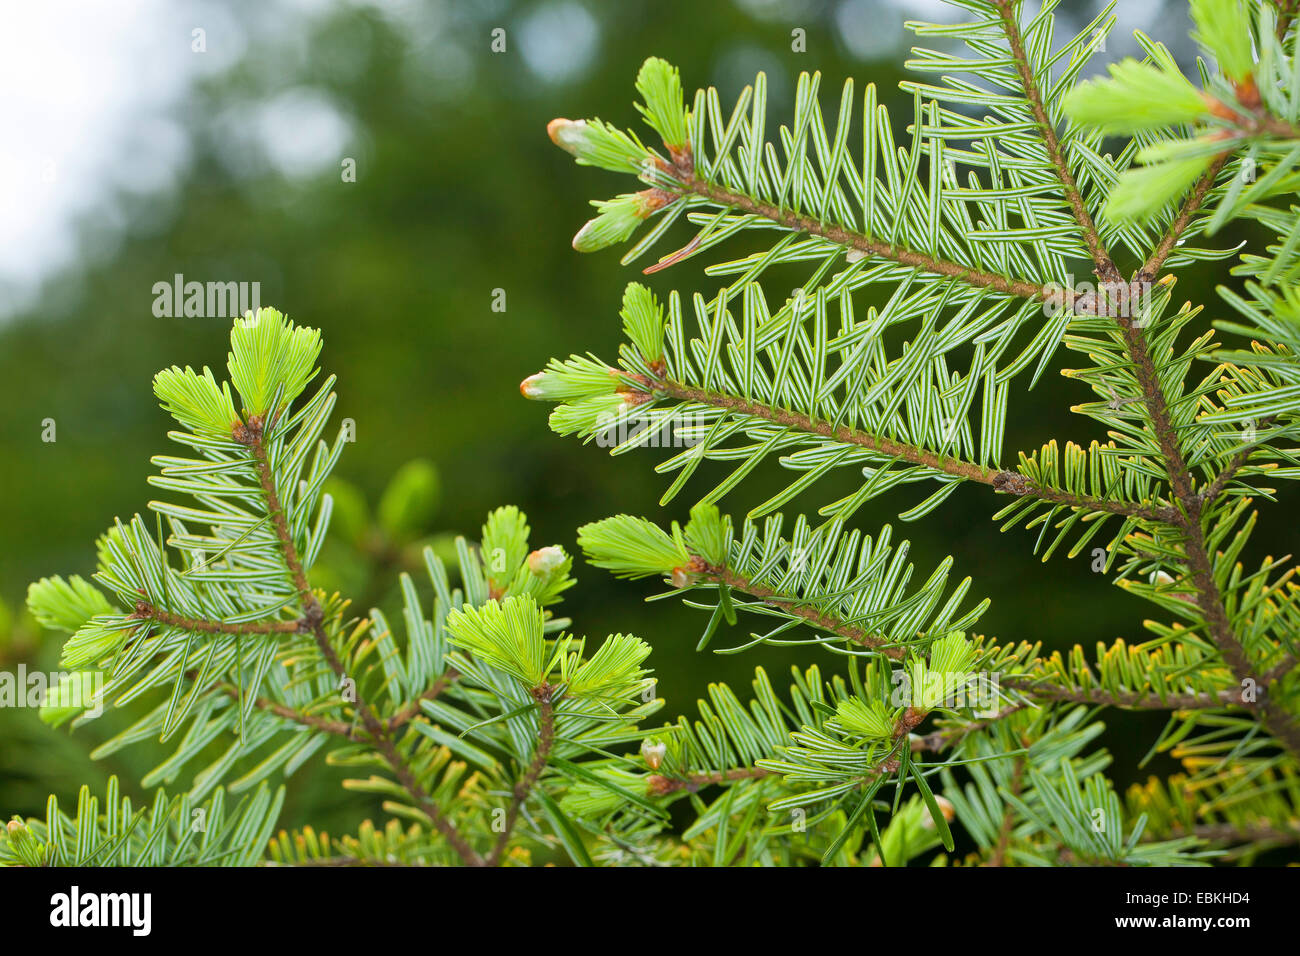 European silver fir (Abies alba), branch from below with young shoots, Germany Stock Photo